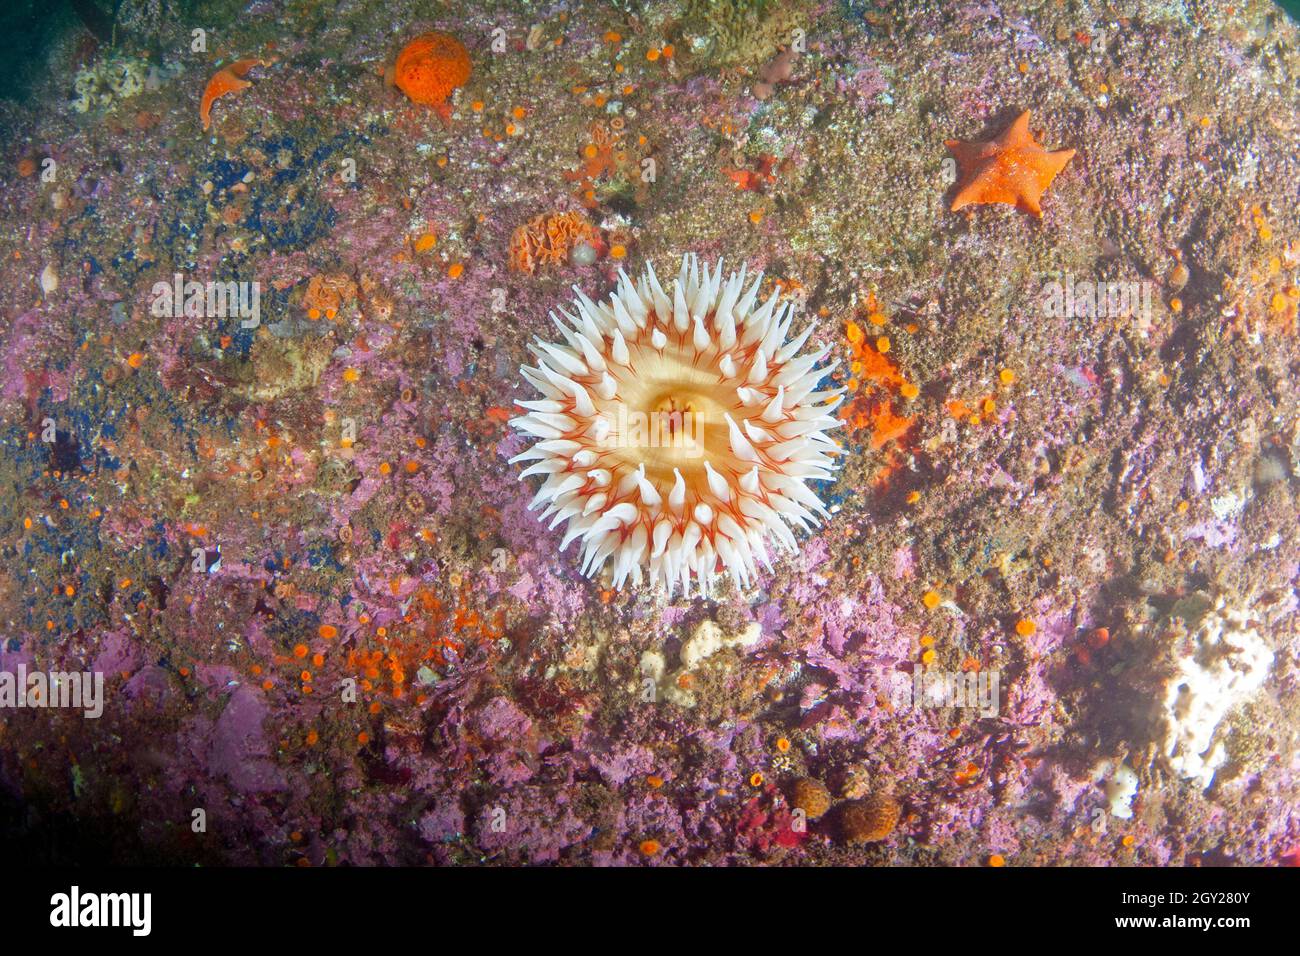 Painted anemone, Urticina grebelnyi, Point Lobos State Natural Reserve, California, USA Stock Photo